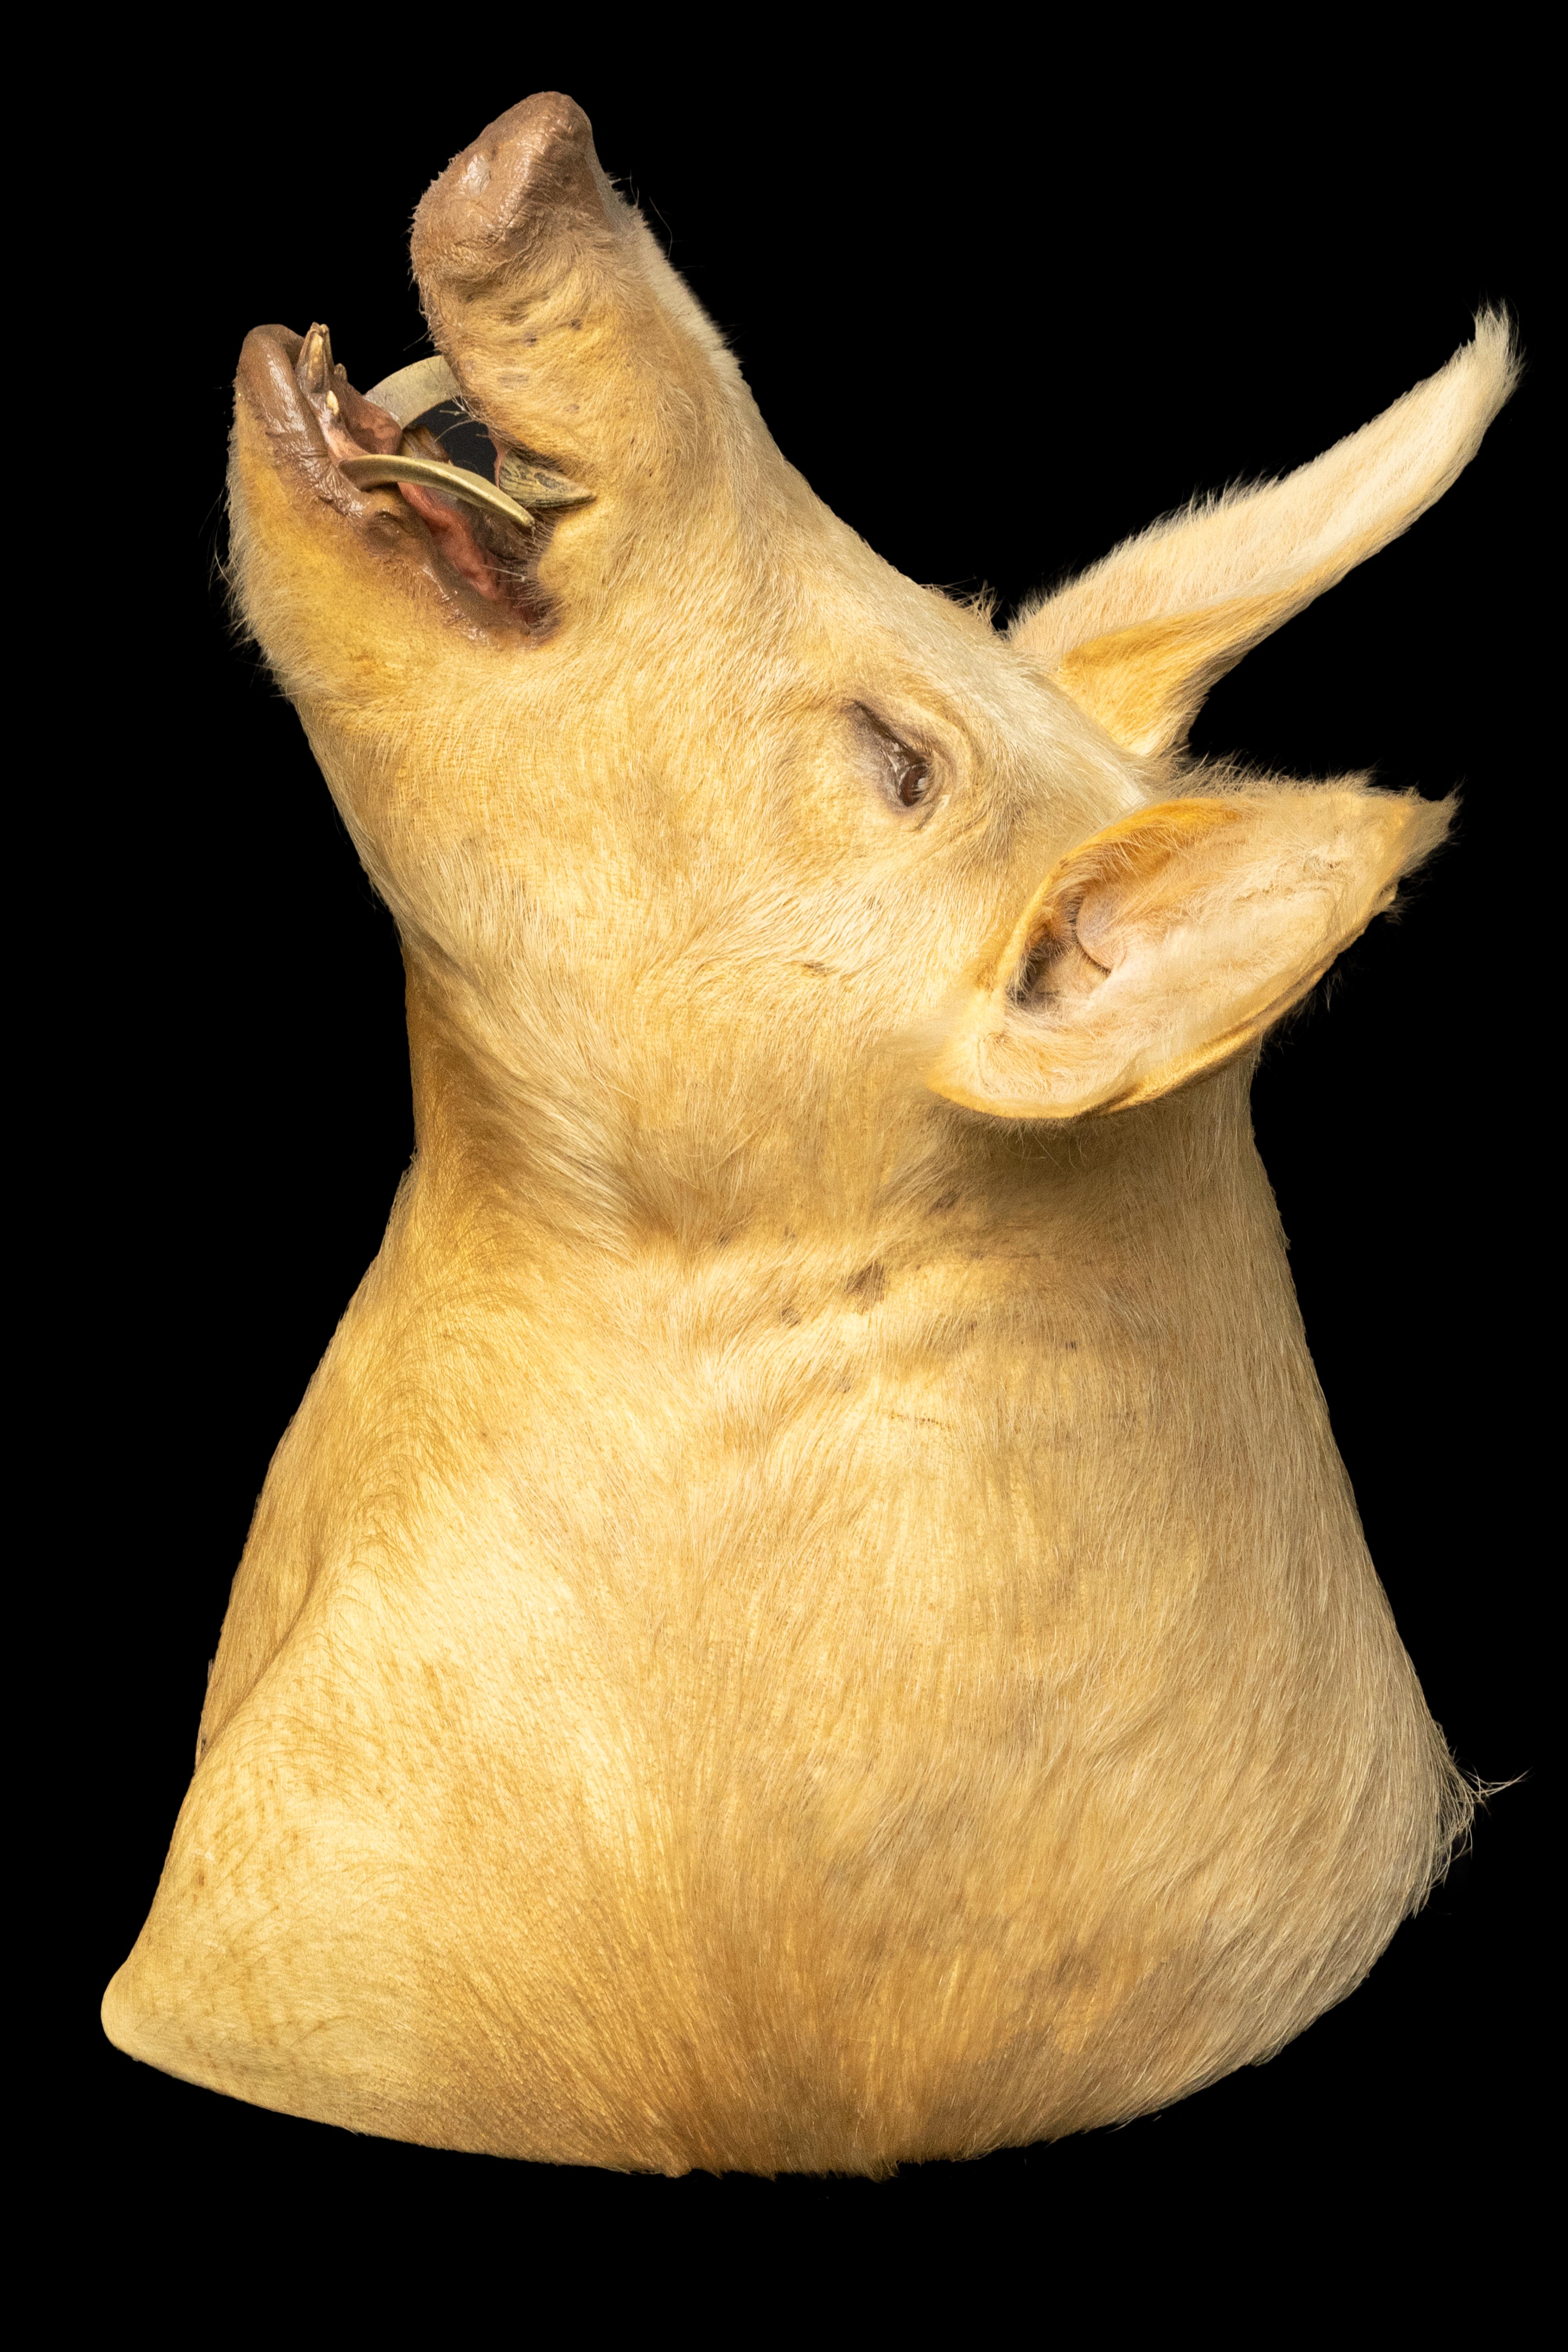 This pig shoulder mount taxidermy is a unique and impressive addition to any collection. The mount captures the essence of this common farm animal, with its distinct snout, large ears and tusks.

Measuring 26